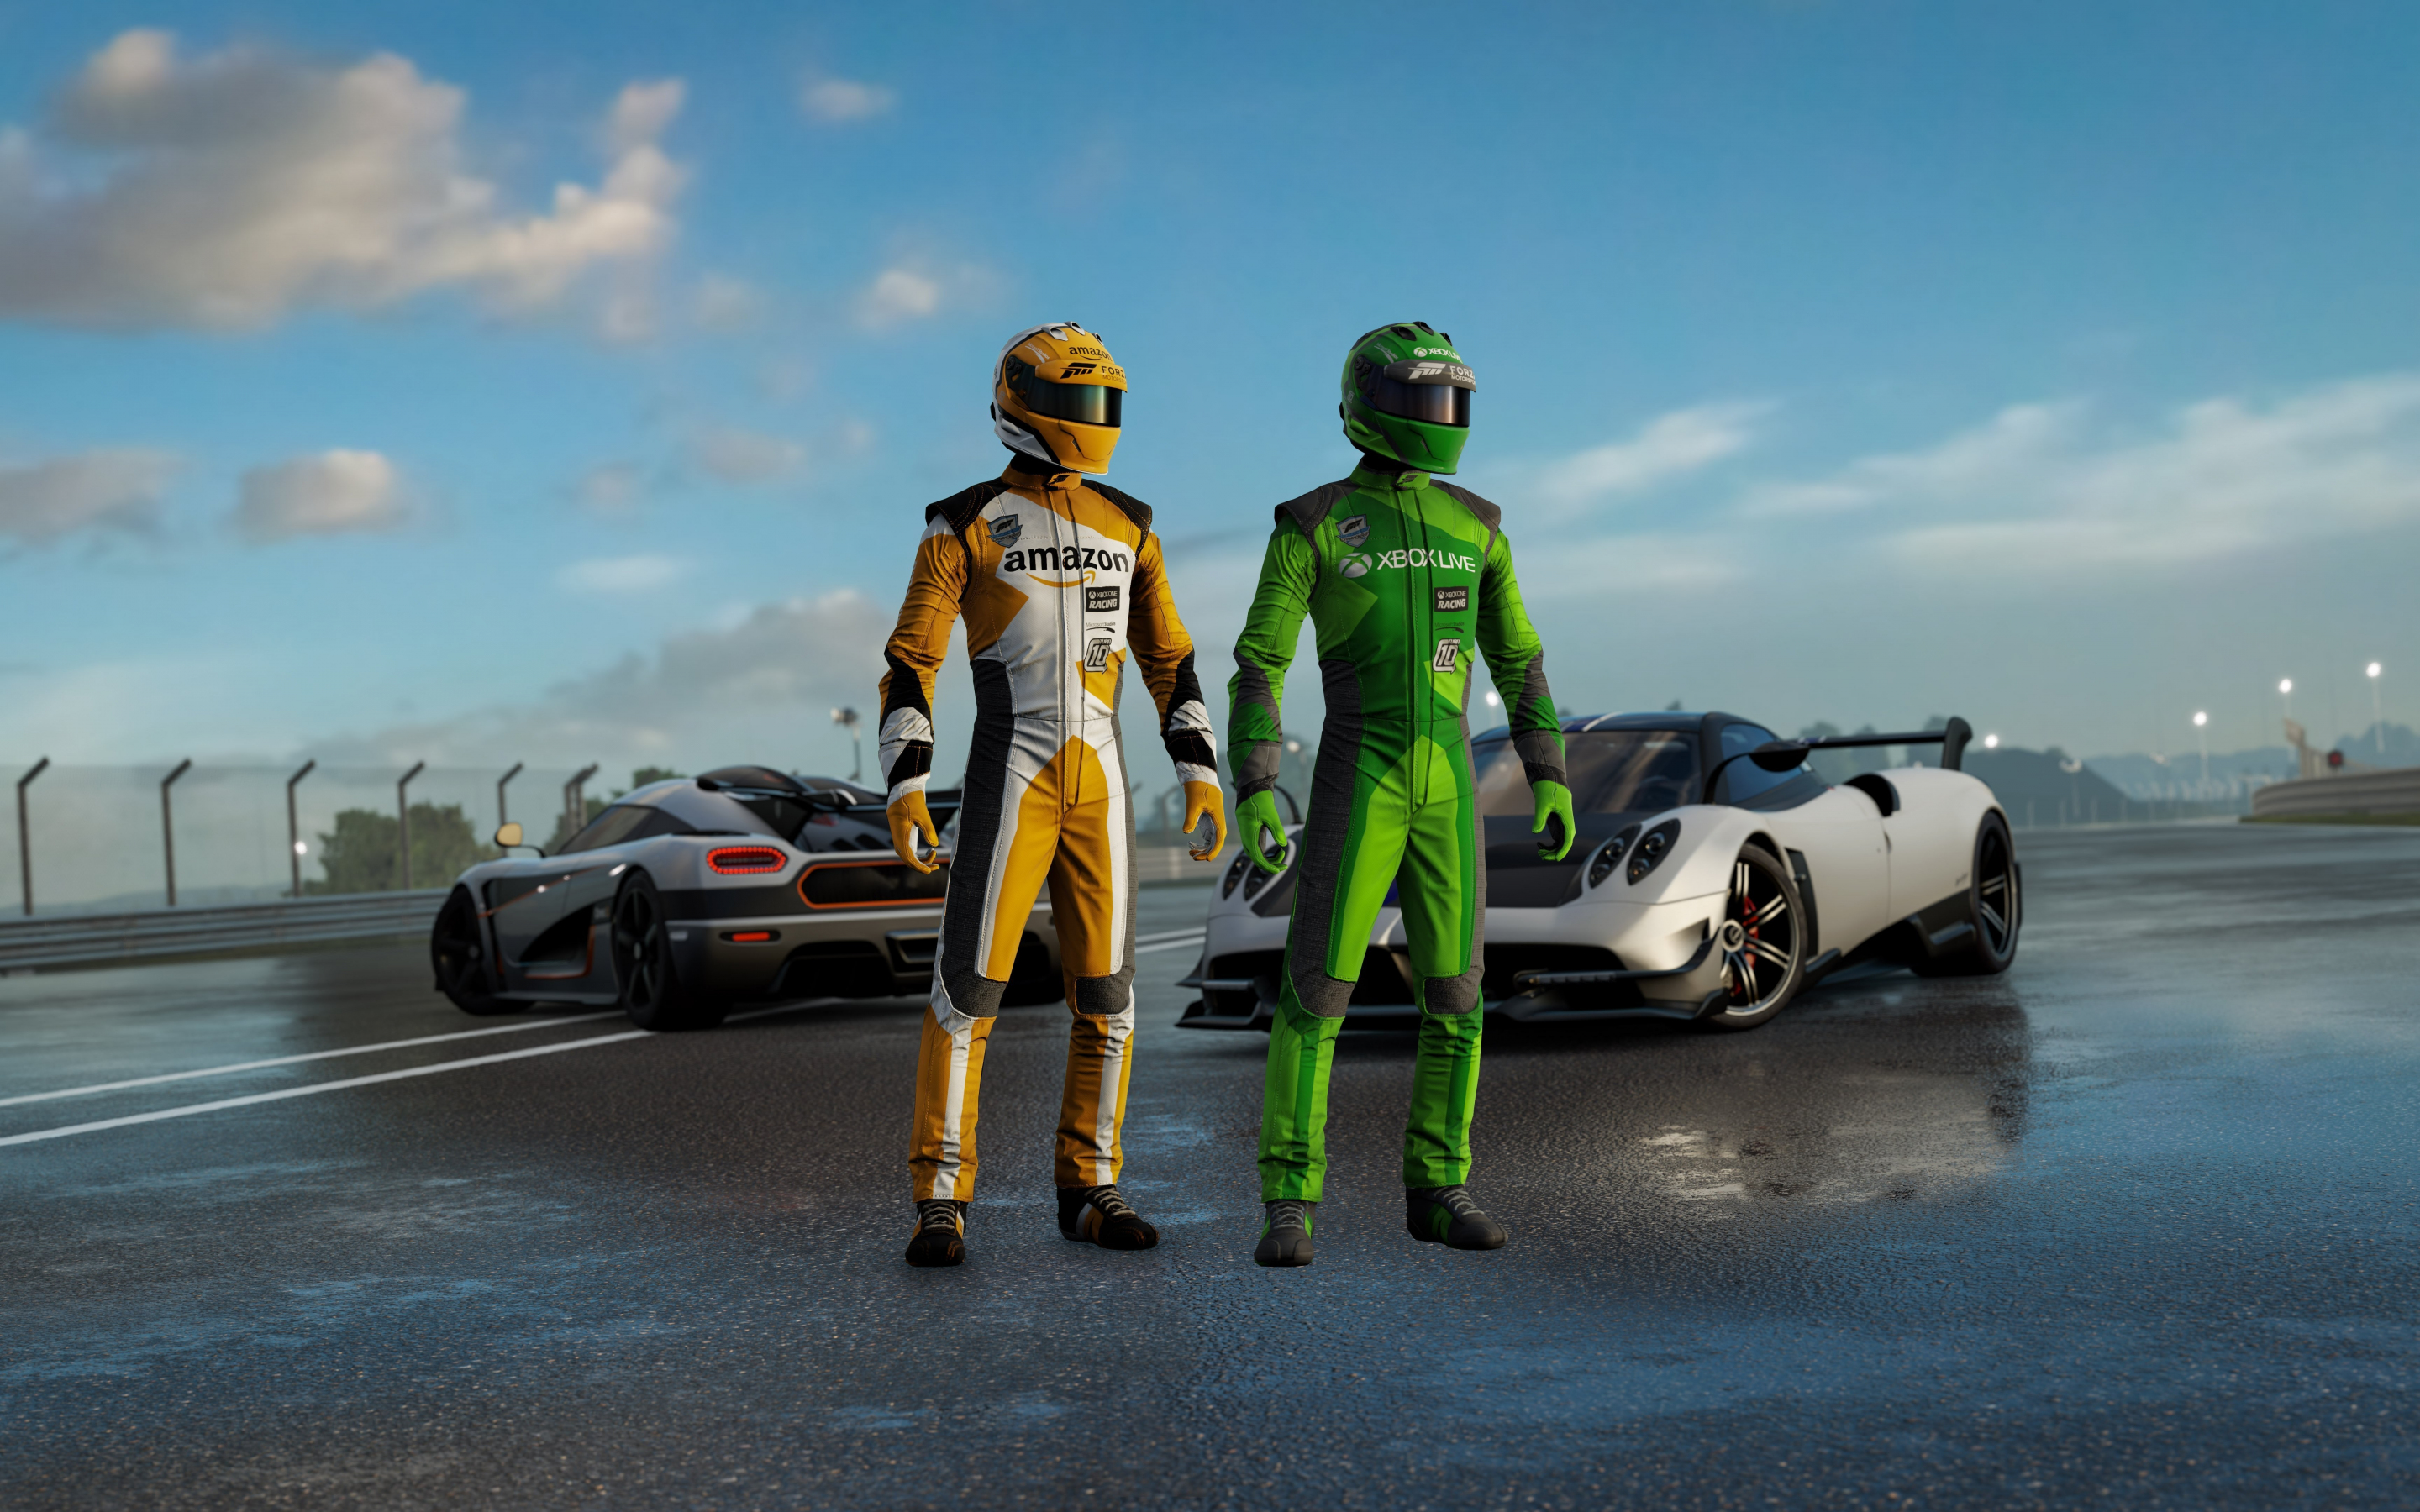 Forza Motorsport 7, xbox one x, video game, 2880x1800 wallpaper